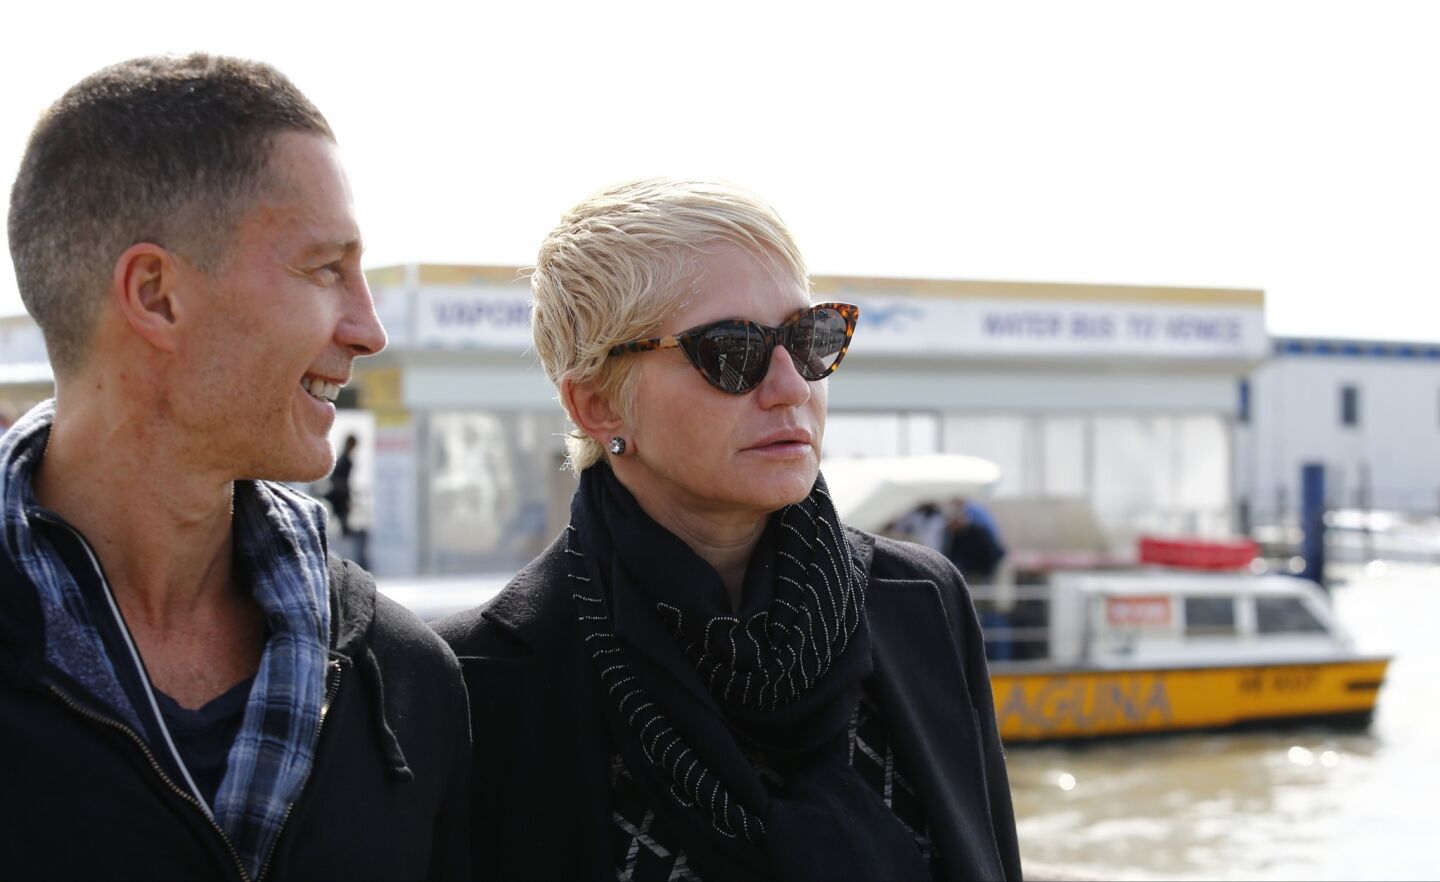 Ellen Barkin and an unidentified guest arrive at Marco Polo Airport in Venice. Barkin was in "Ocean's Thirteen" with George Clooney.